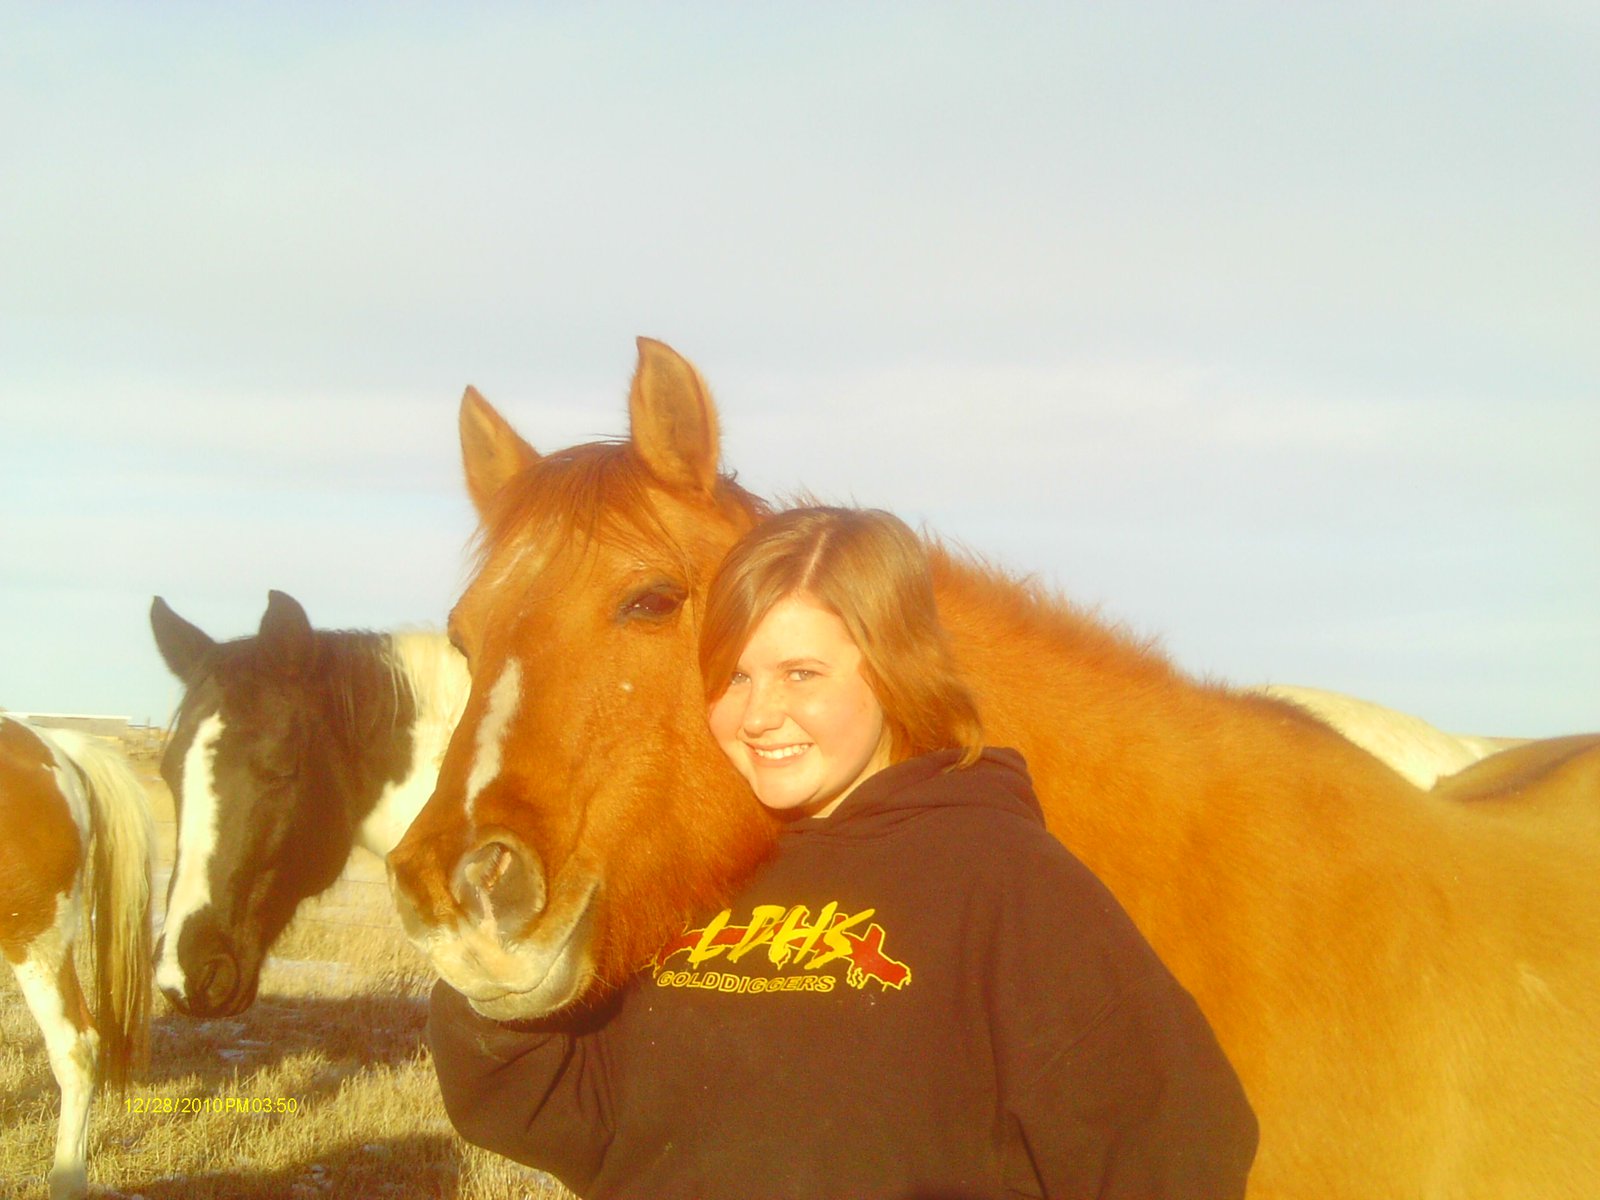 Me and horse - 1 of 2